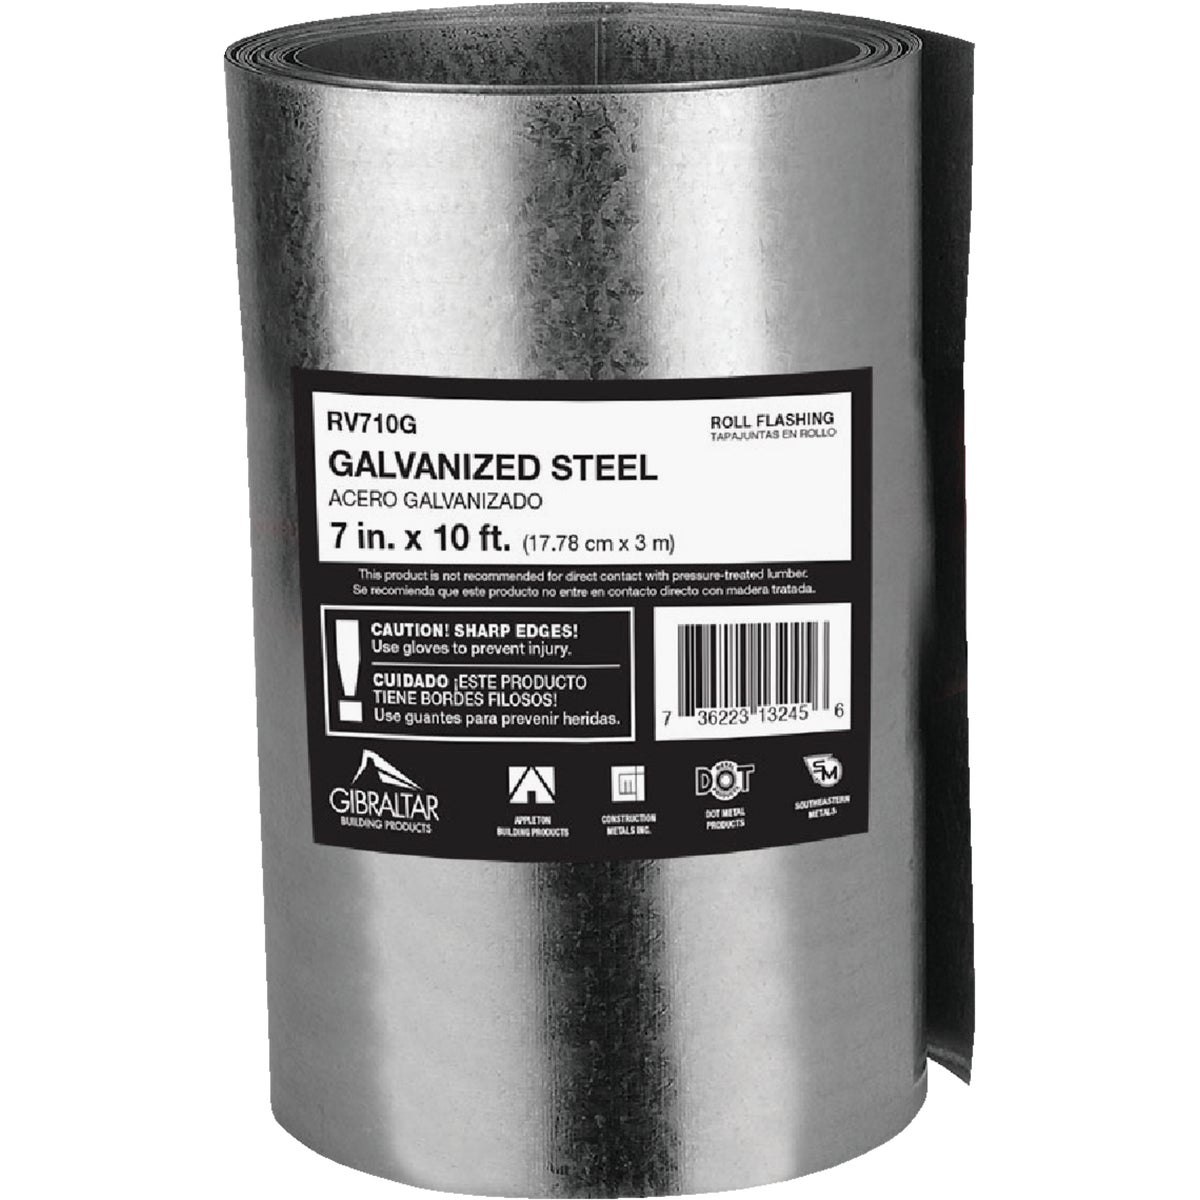 NorWesco 518940 NorWesco 7 In. x 10 Ft. Mill Galvanized Roll Valley Flashing 518940